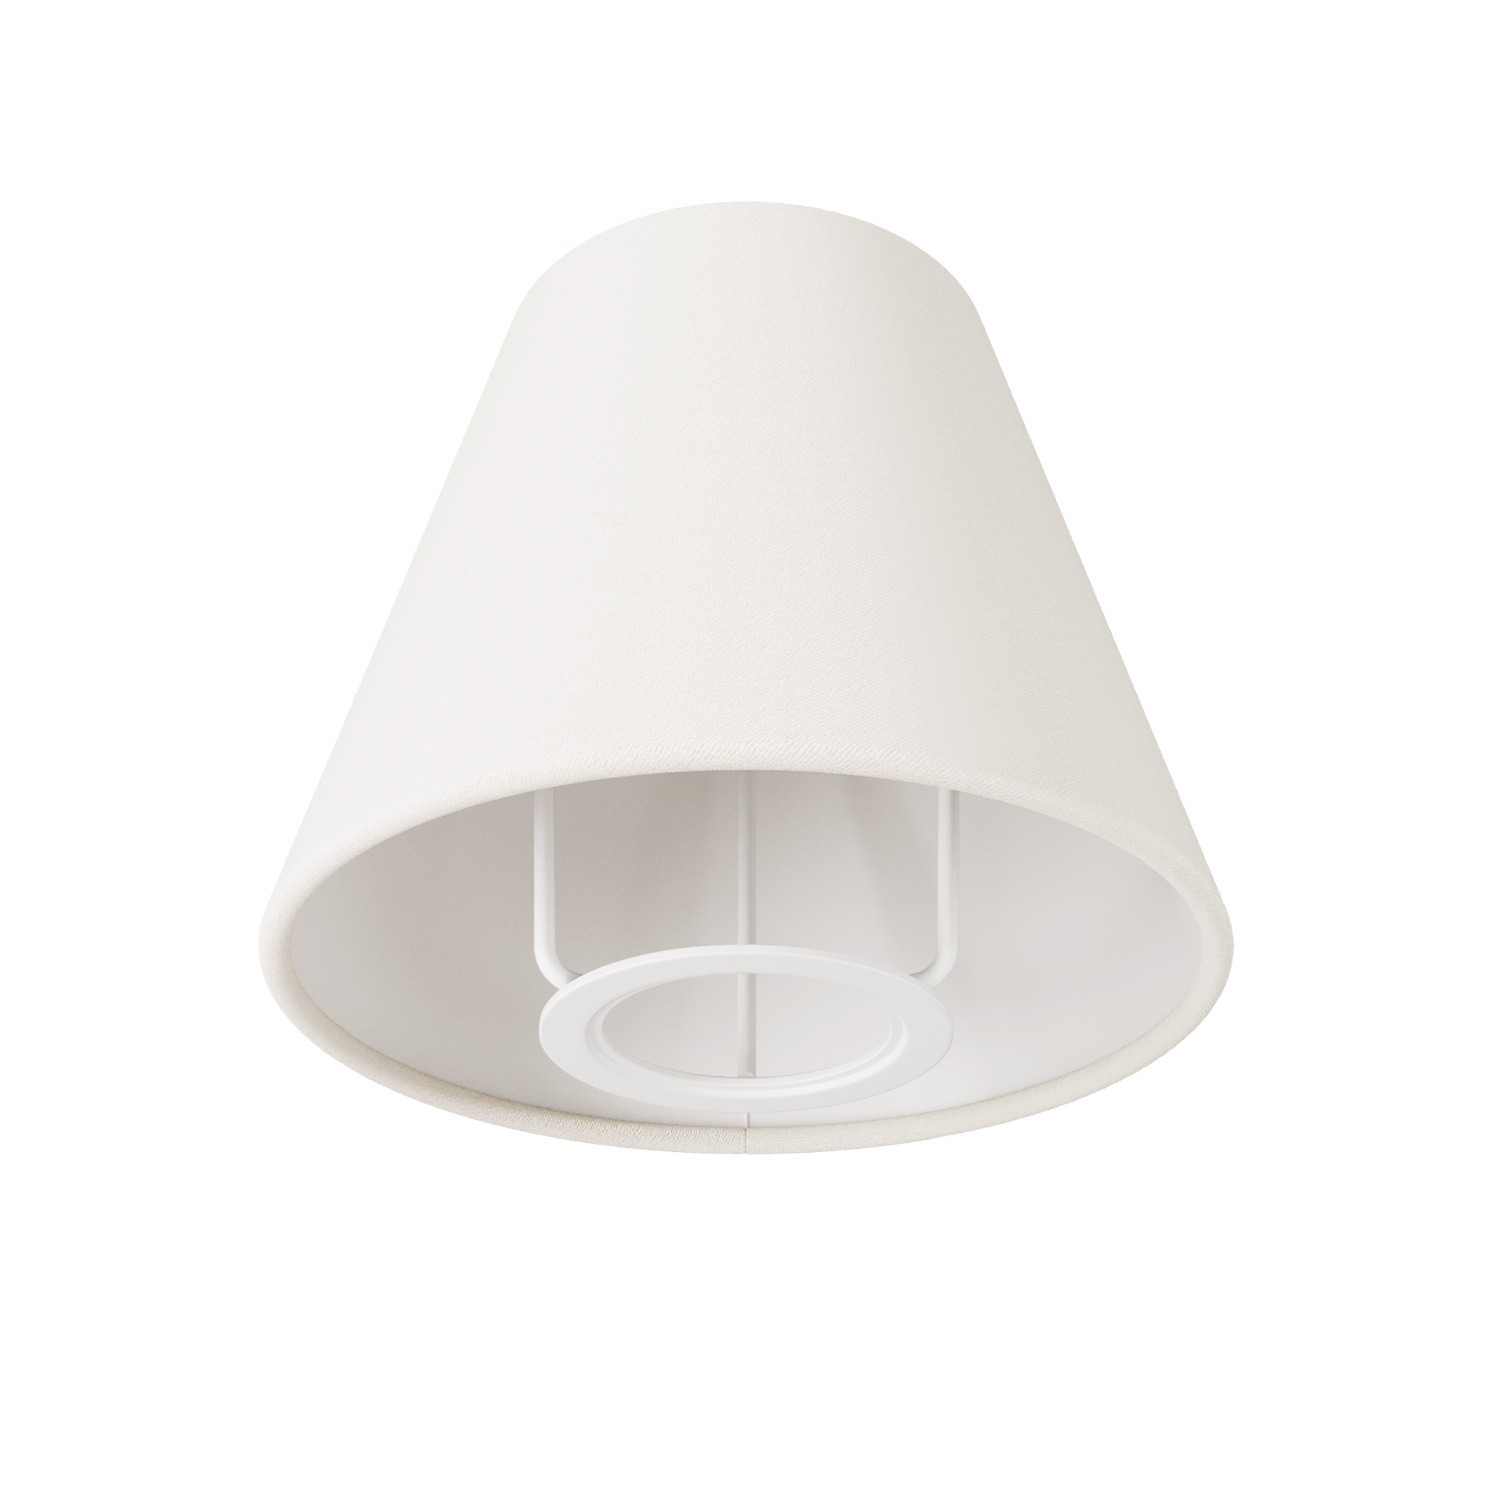 Impero Mini lampshade with E27 fitting for wall fixtures or table lamps